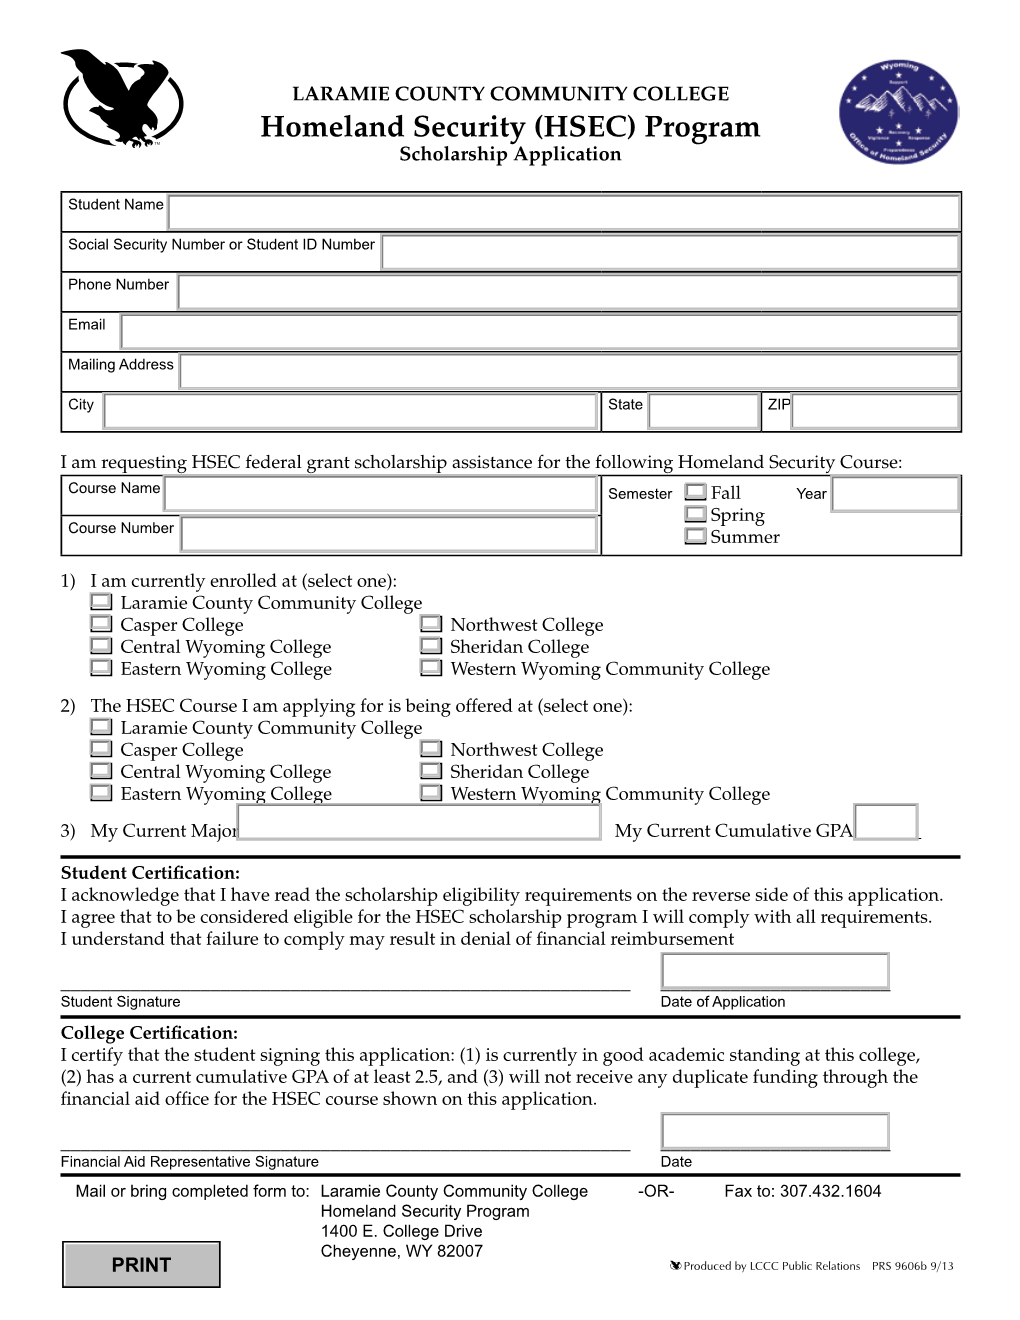 LCCC Homeland Security Program Application and Requirements